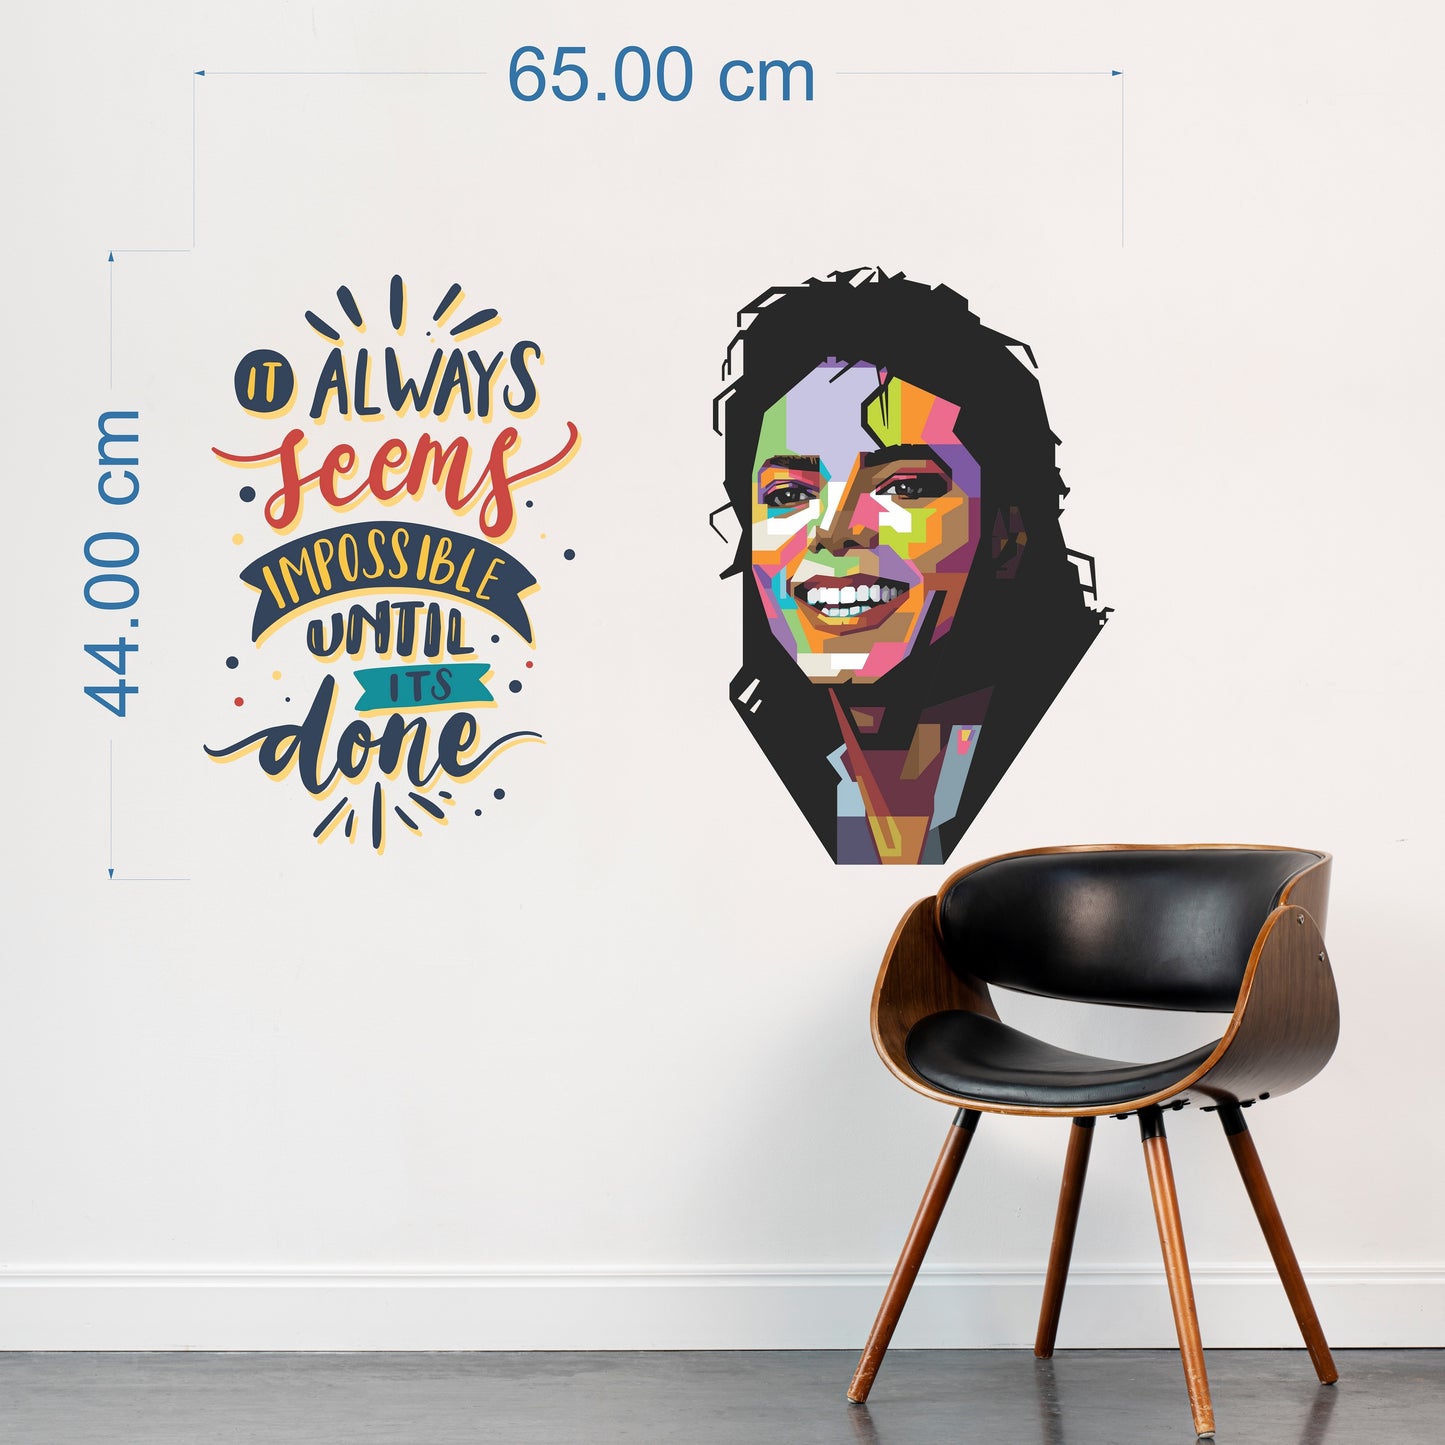 iberry's Inspirational Motivational Quotes Wall Sticker, Always Seems Impossible Until Done"- 44 x 65 cm Wall Stickers for Study- Office-2